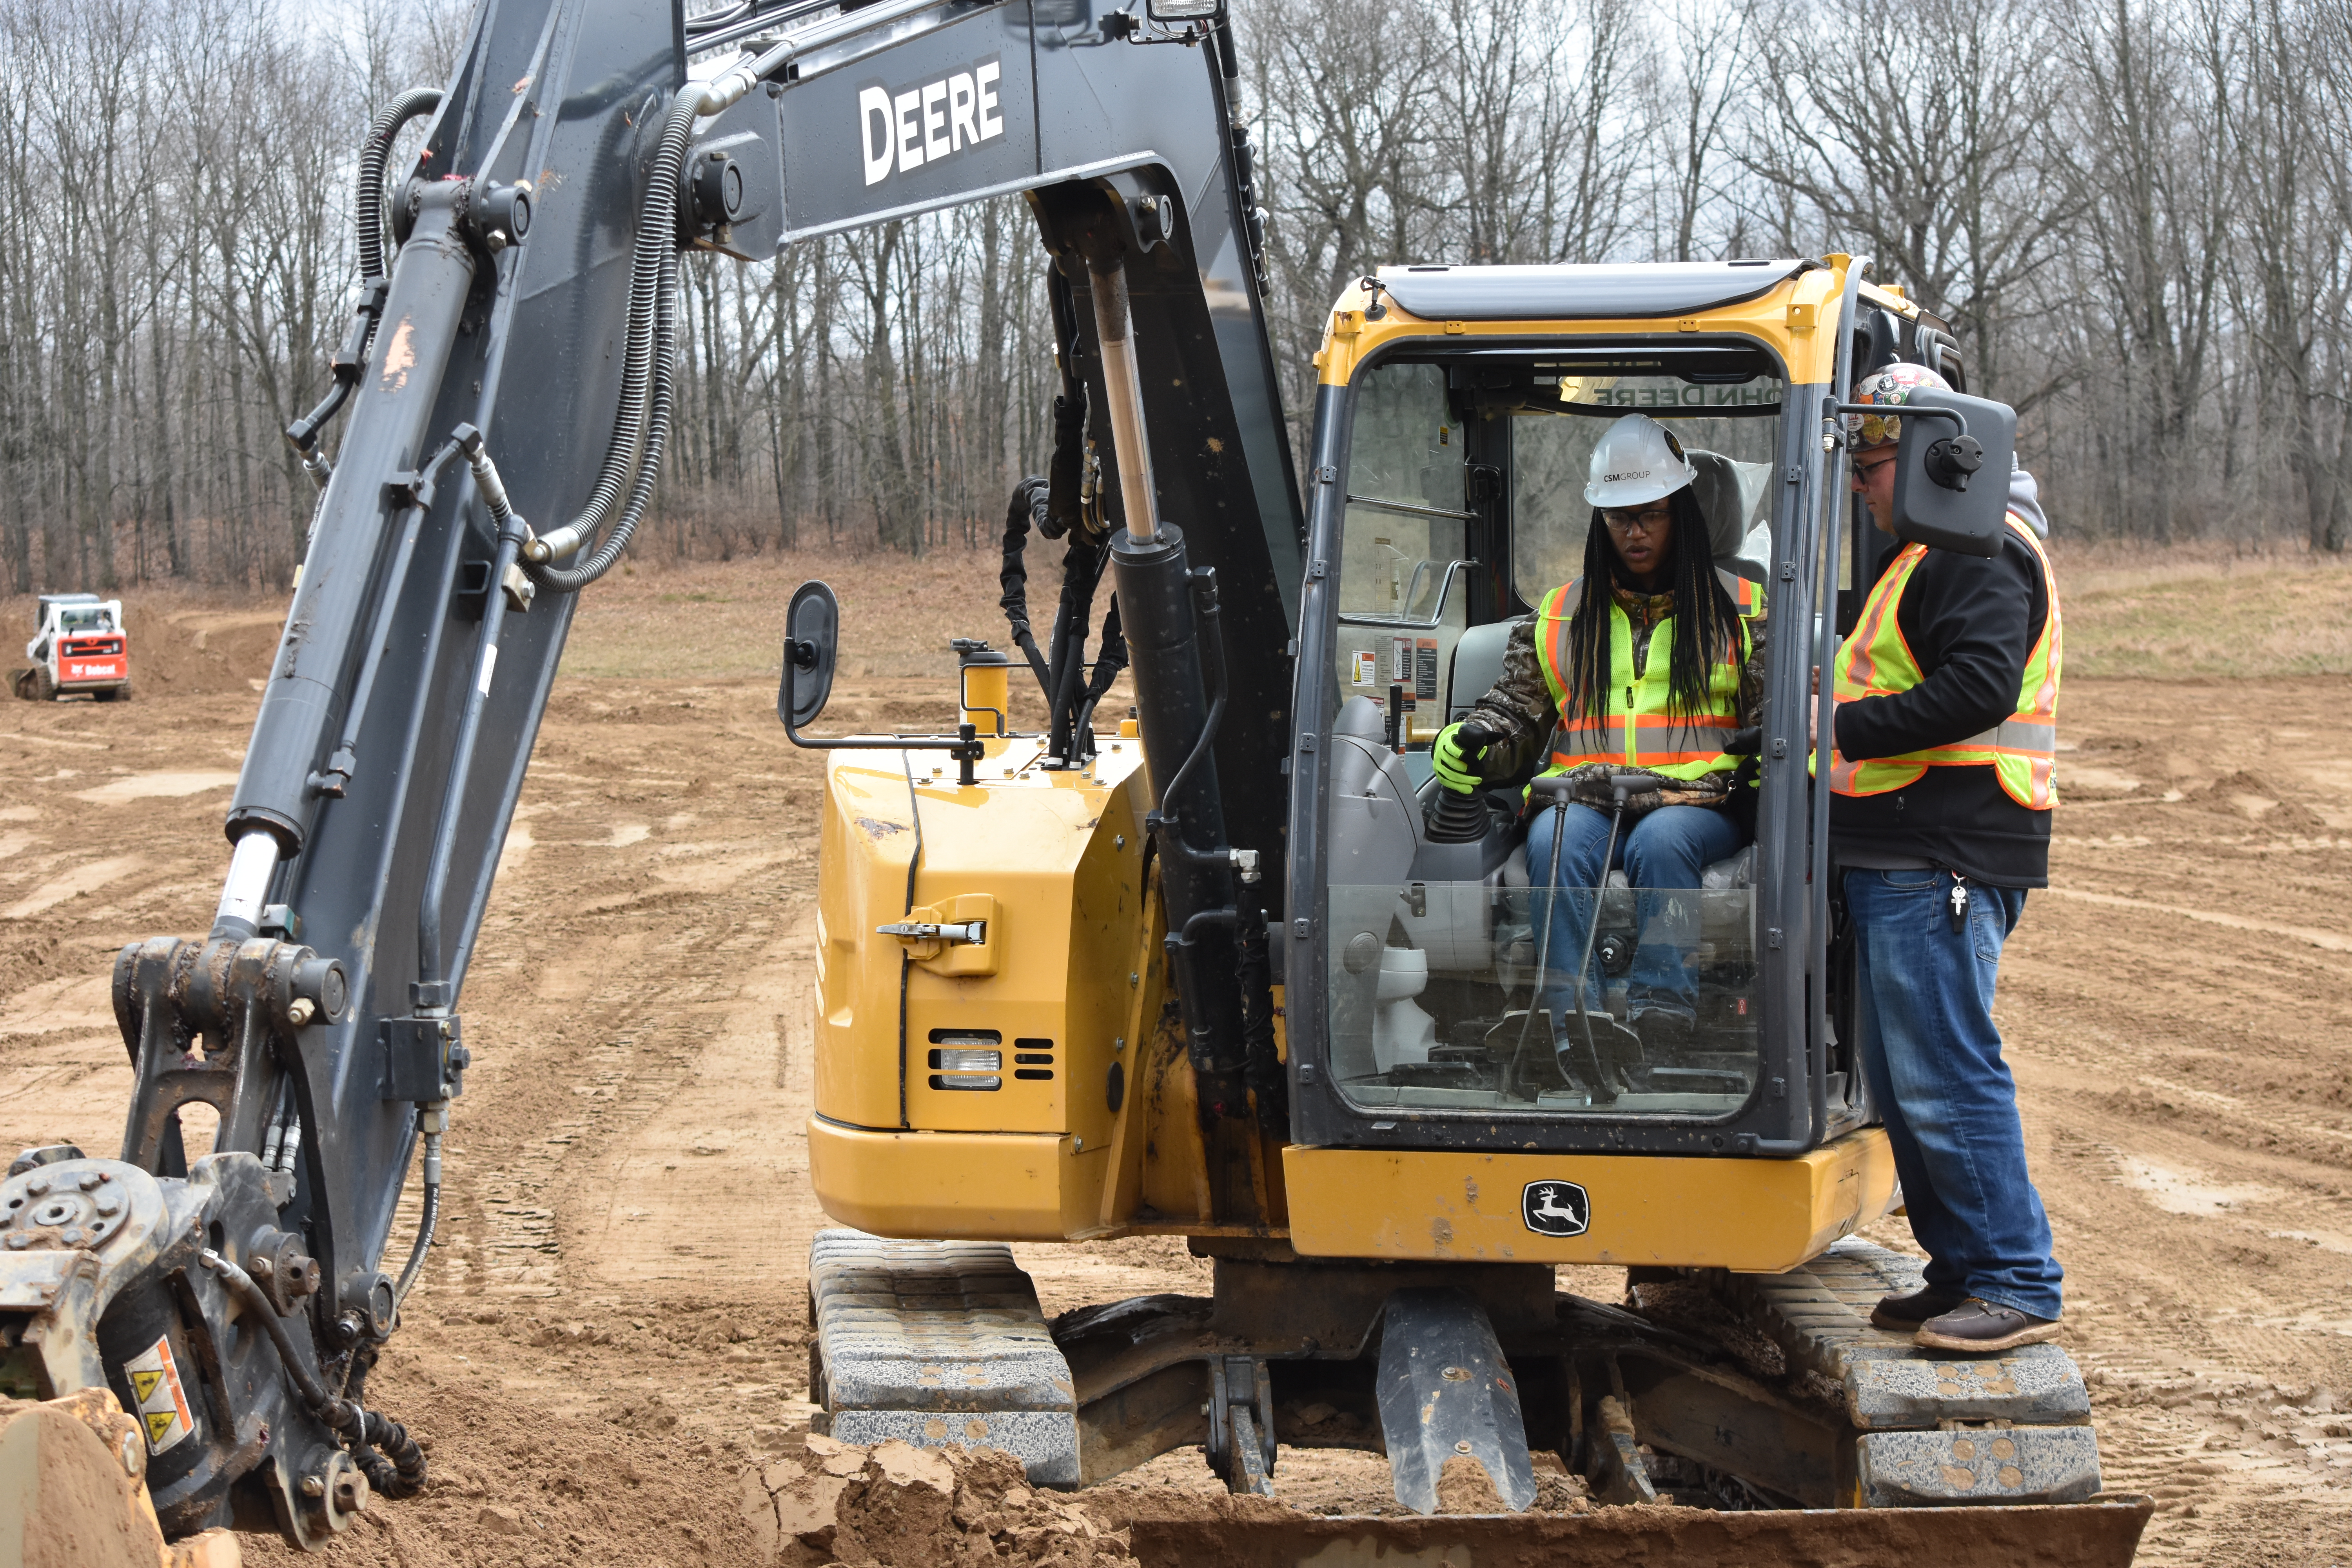 Operator instructs another operator on the controls of a backhoe